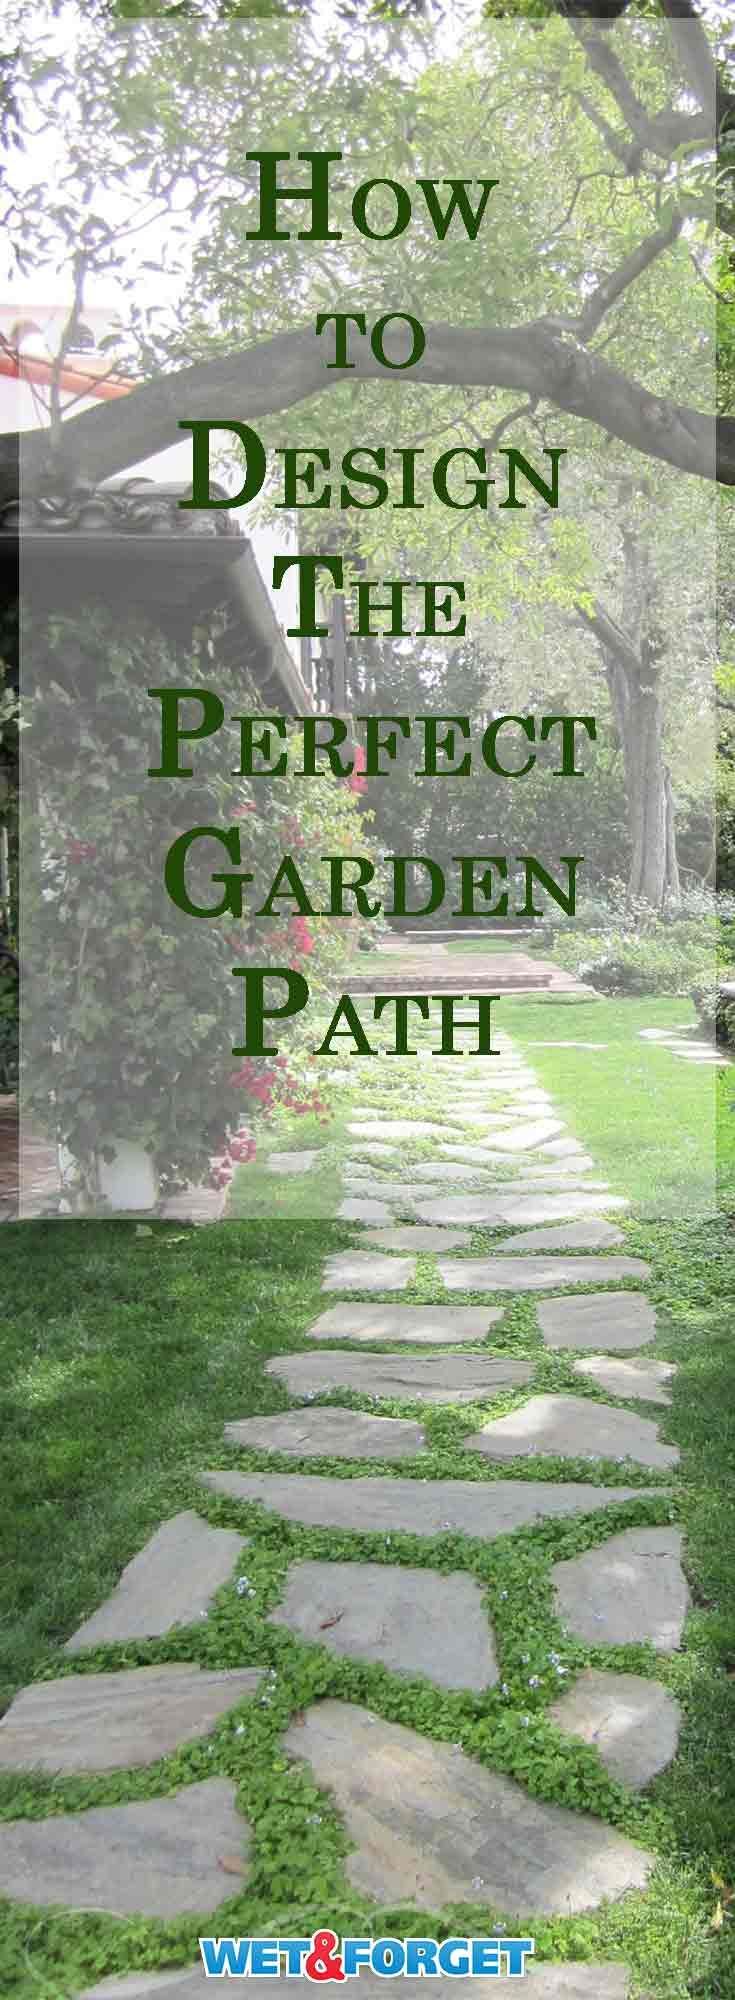 The most beautiful gardens include garden paths that please the eye, invite a stroll around the property, and accent the